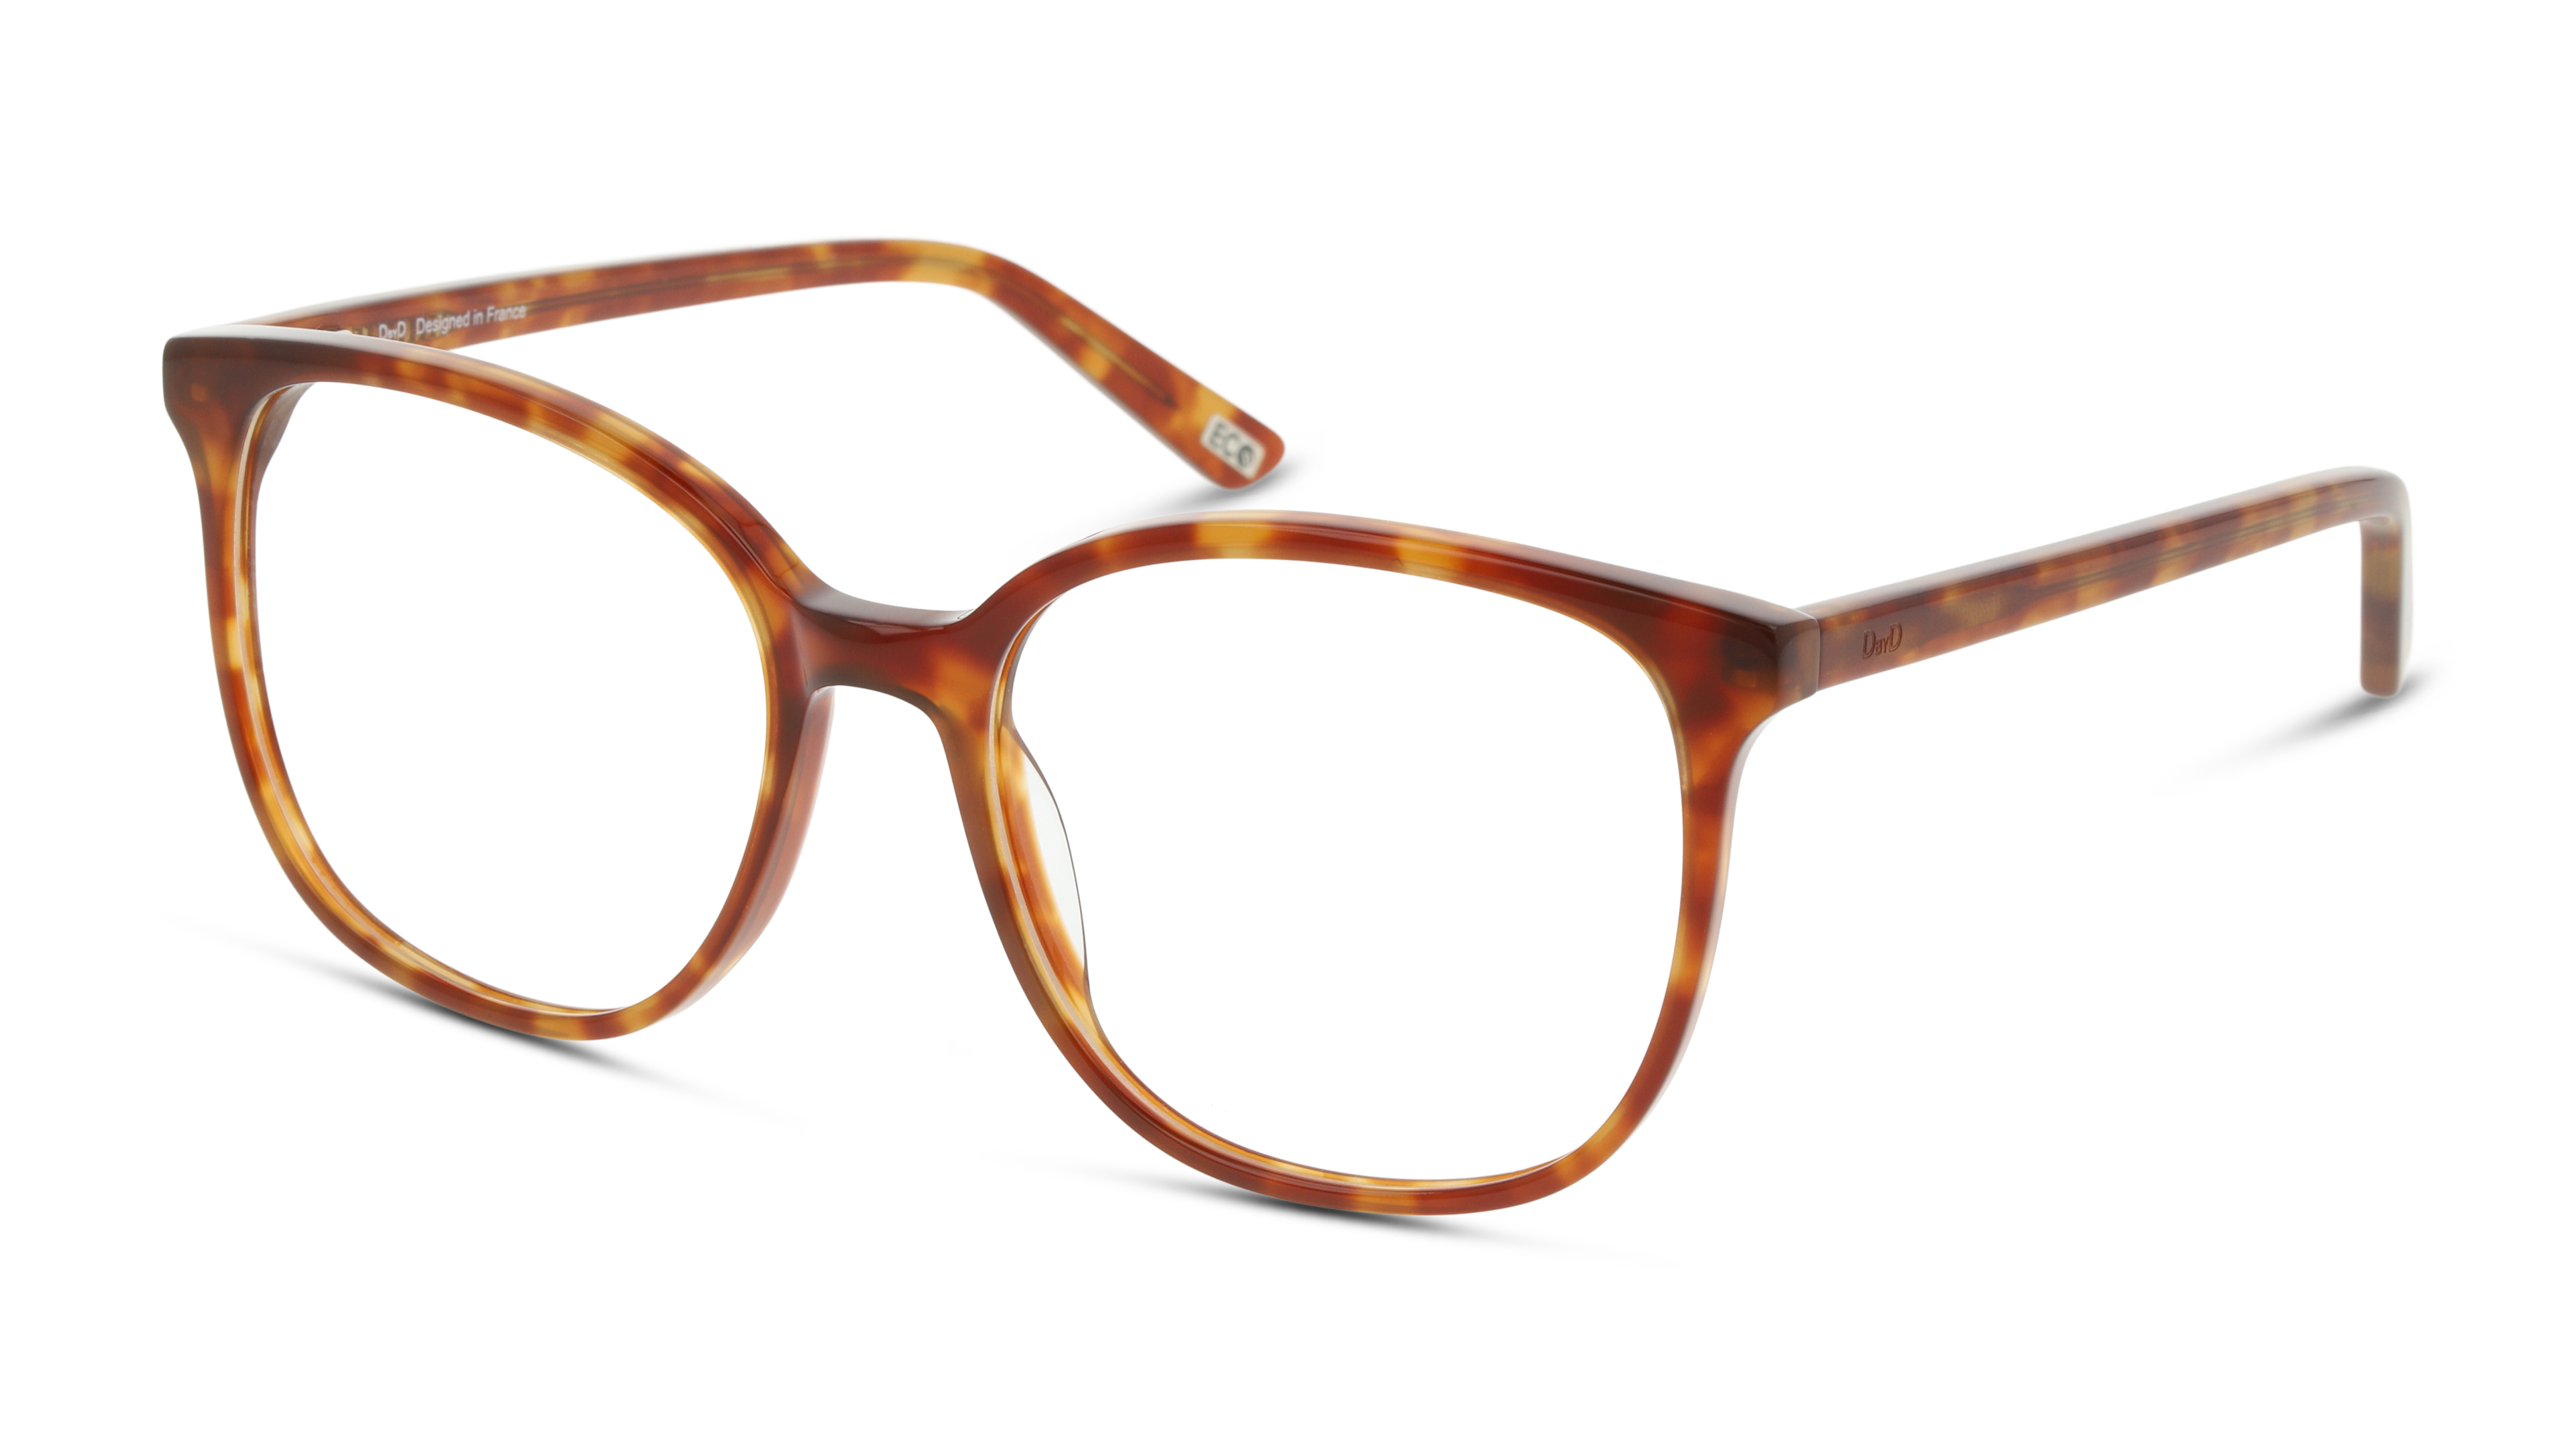 Angle_Left01 DbyD Essentials DB OF0042 Glasses Transparent / Tortoise Shell